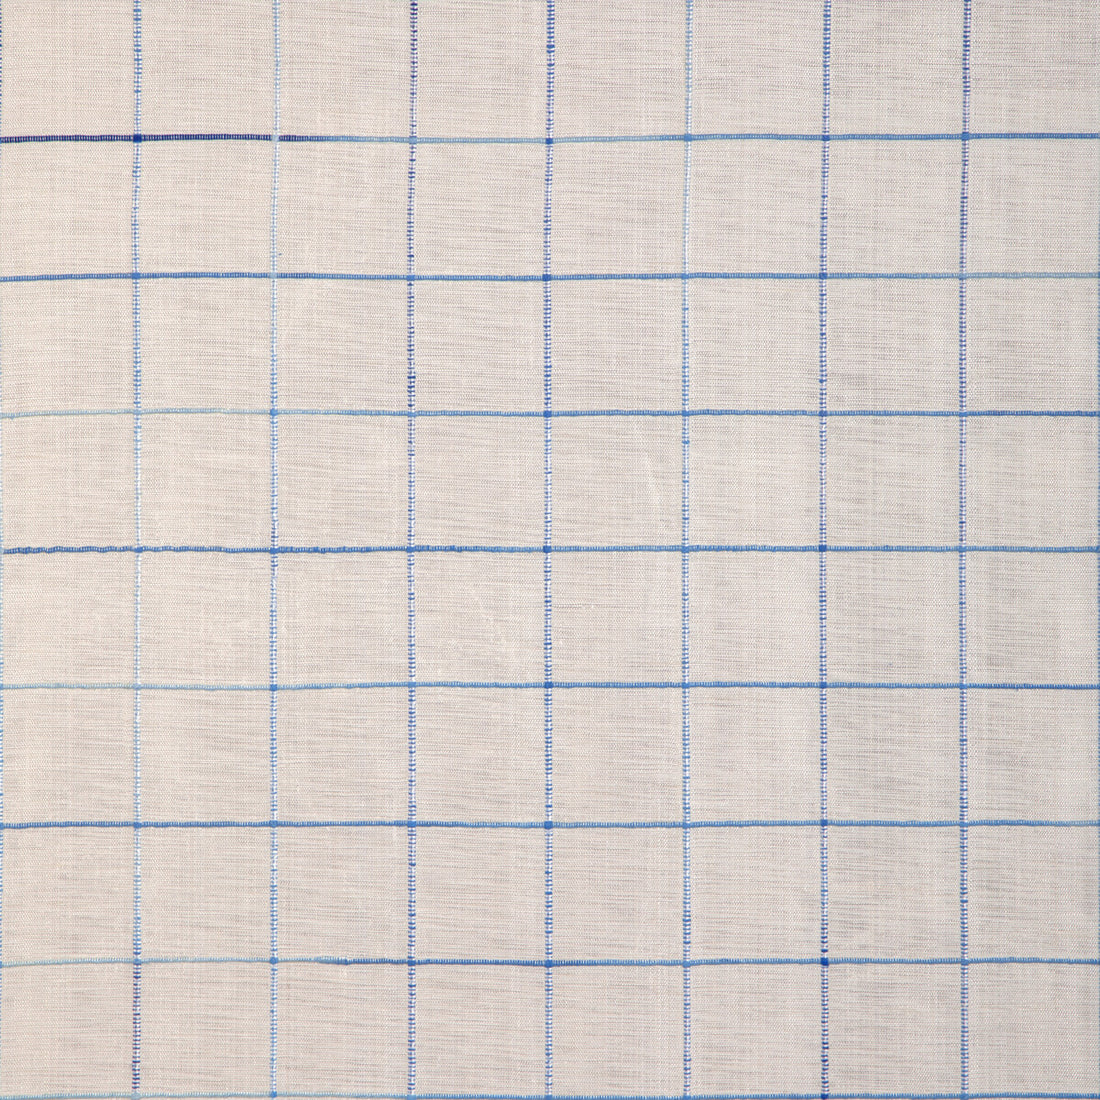 Moulin Check fabric in blue color - pattern 8023149.55.0 - by Brunschwig &amp; Fils in the Vienne Silks collection